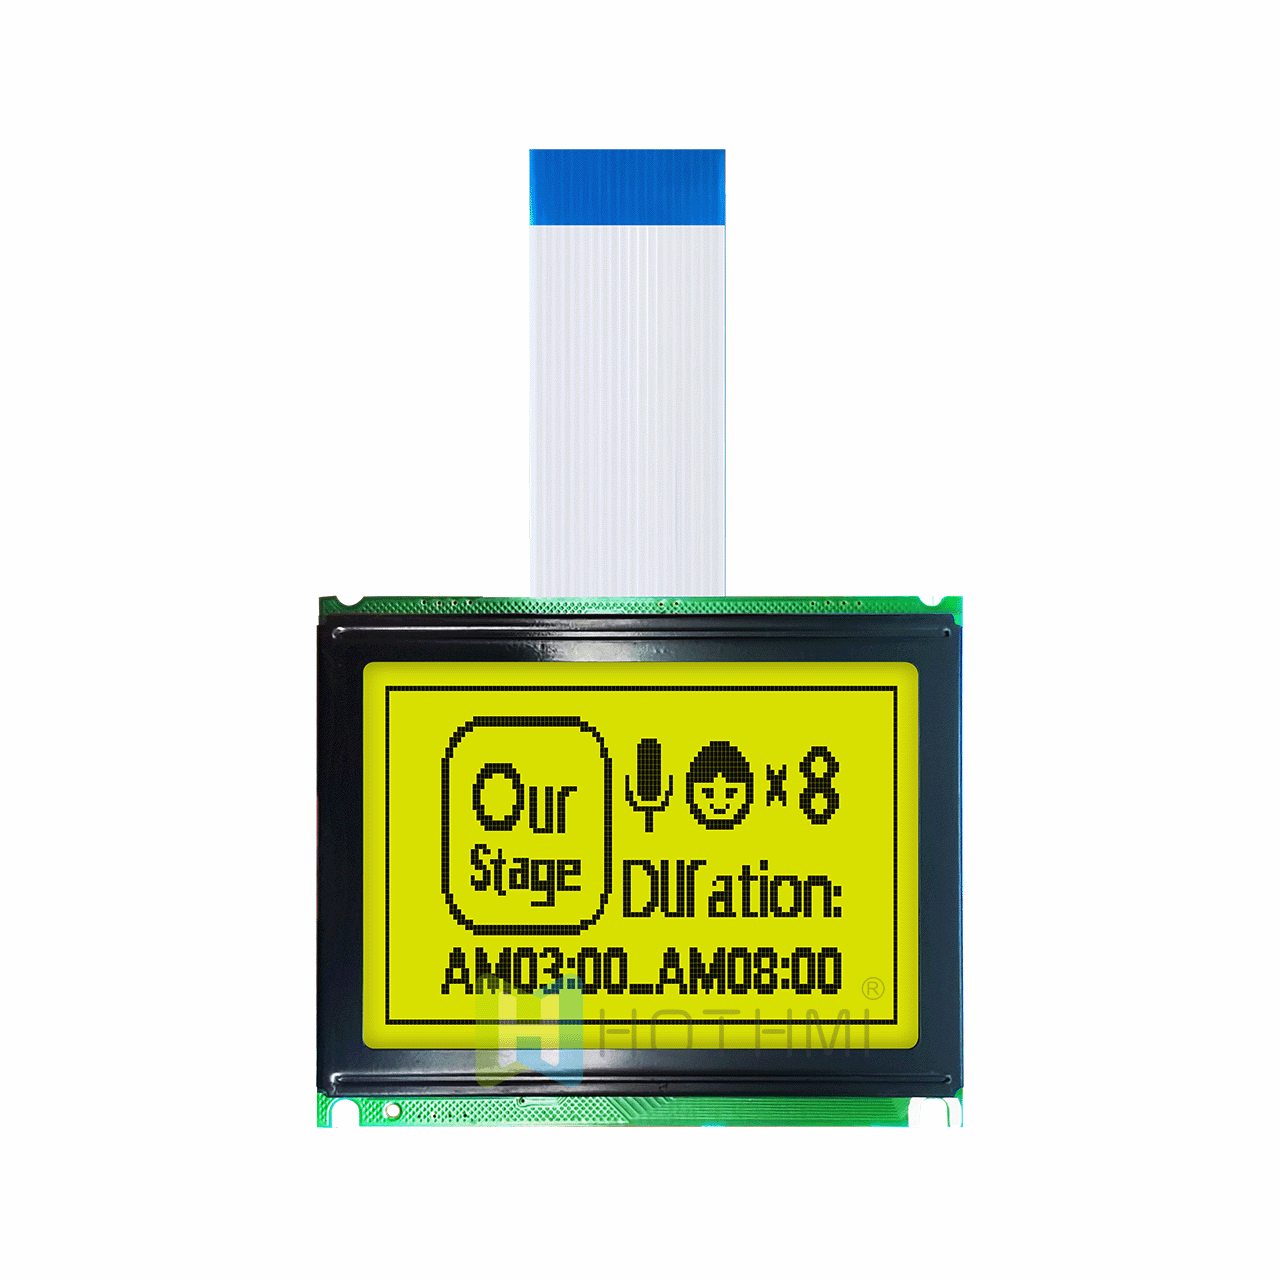 3-inch 128x64 graphic LCD display | 12864 graphic LCD module | STN positive display | yellow-green backlight